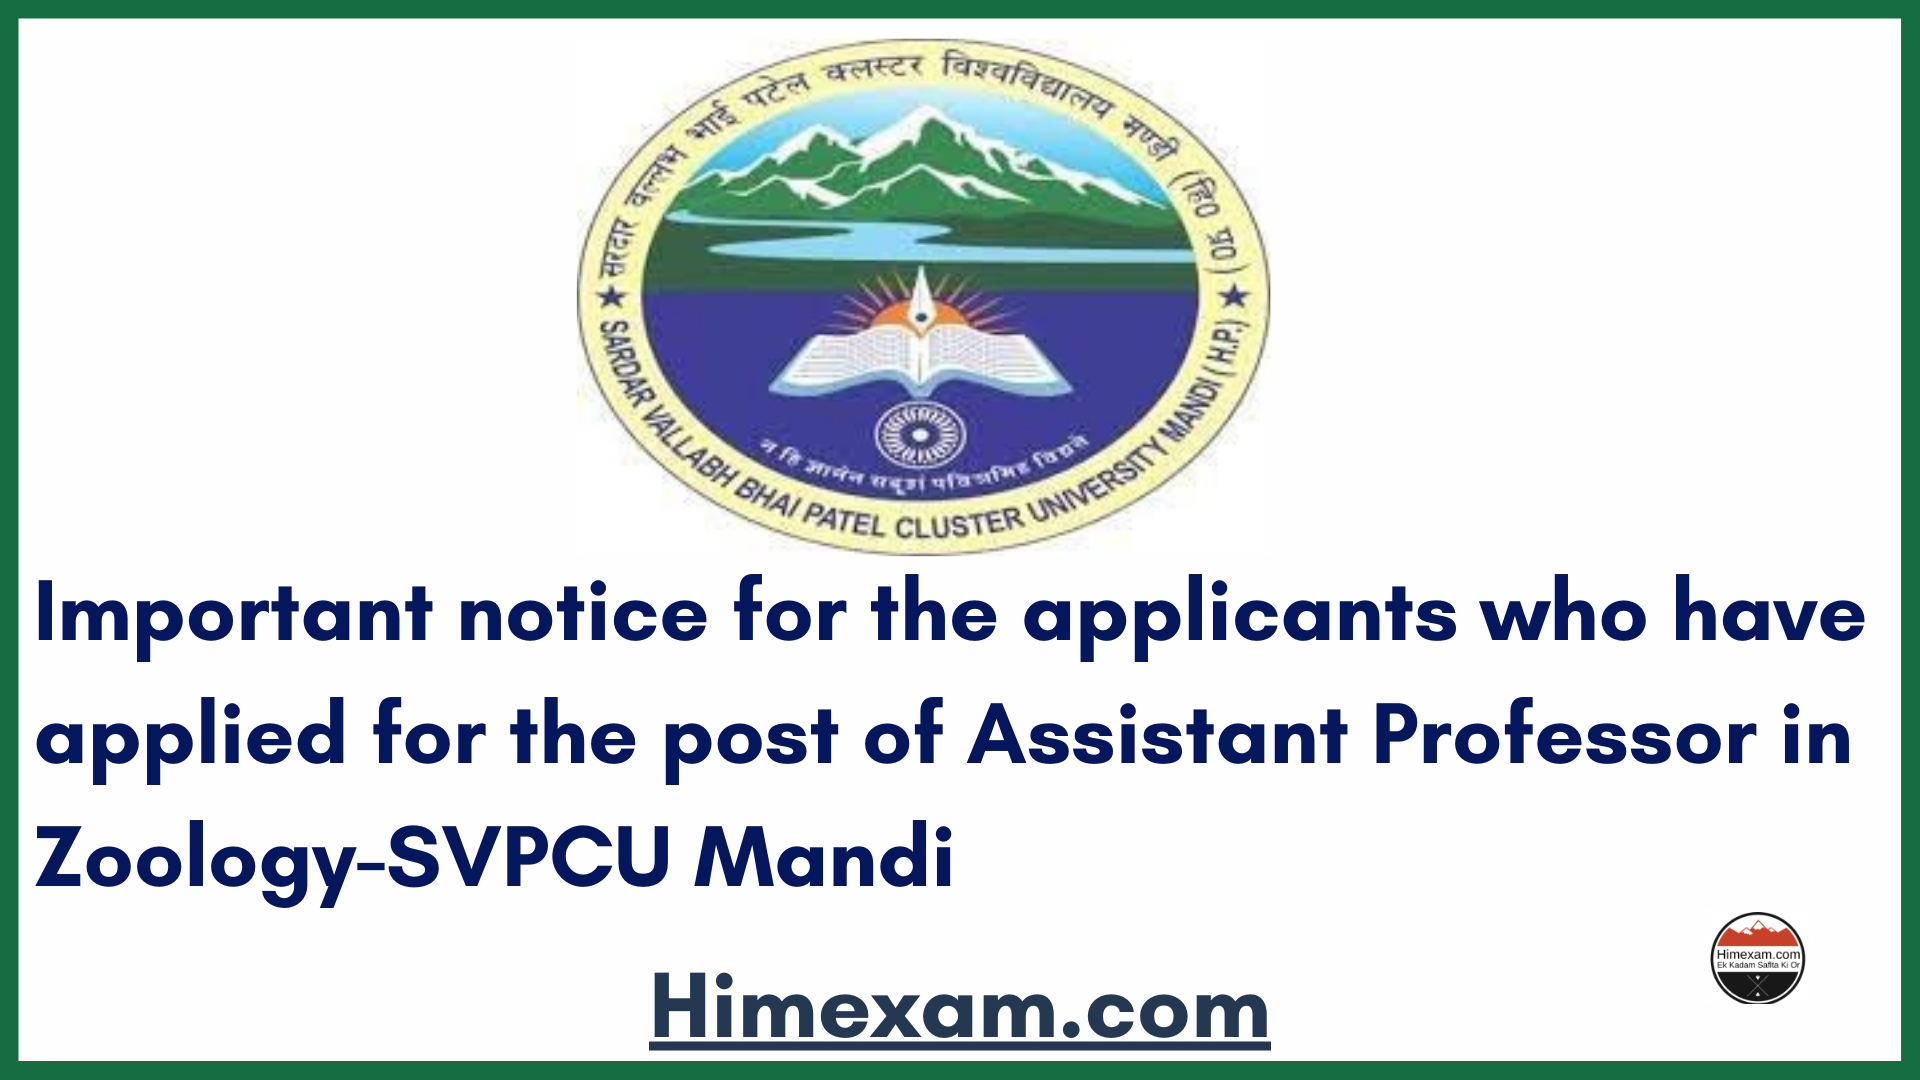 Important notice for the applicants who have applied for the post of Assistant Professor in Zoology-SVPCU Mandi